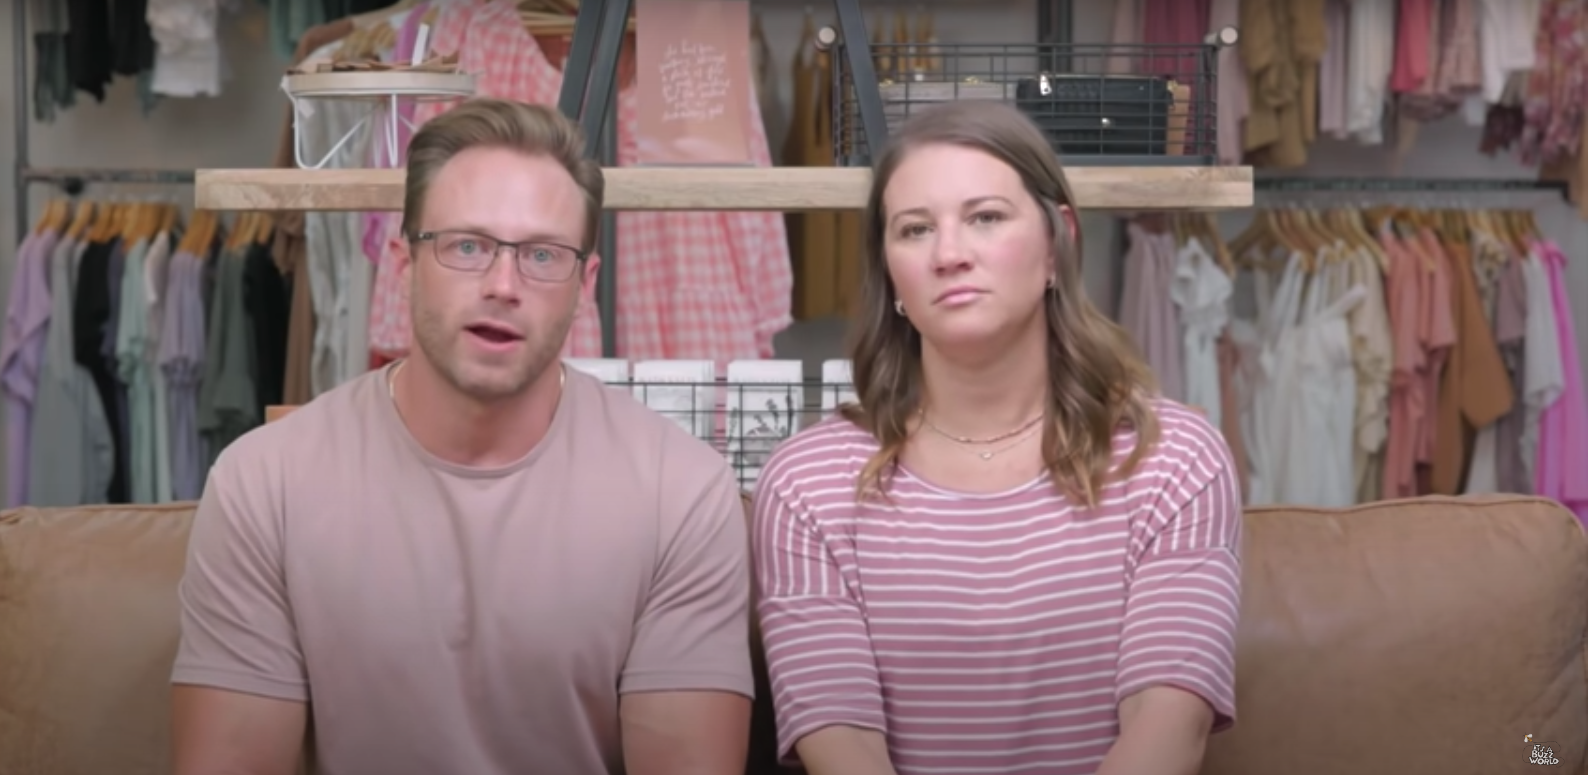 Is ‘OutDaughtered’ Still On? Fans Wonder What’s Happening With the Busby Family’s TLC Show